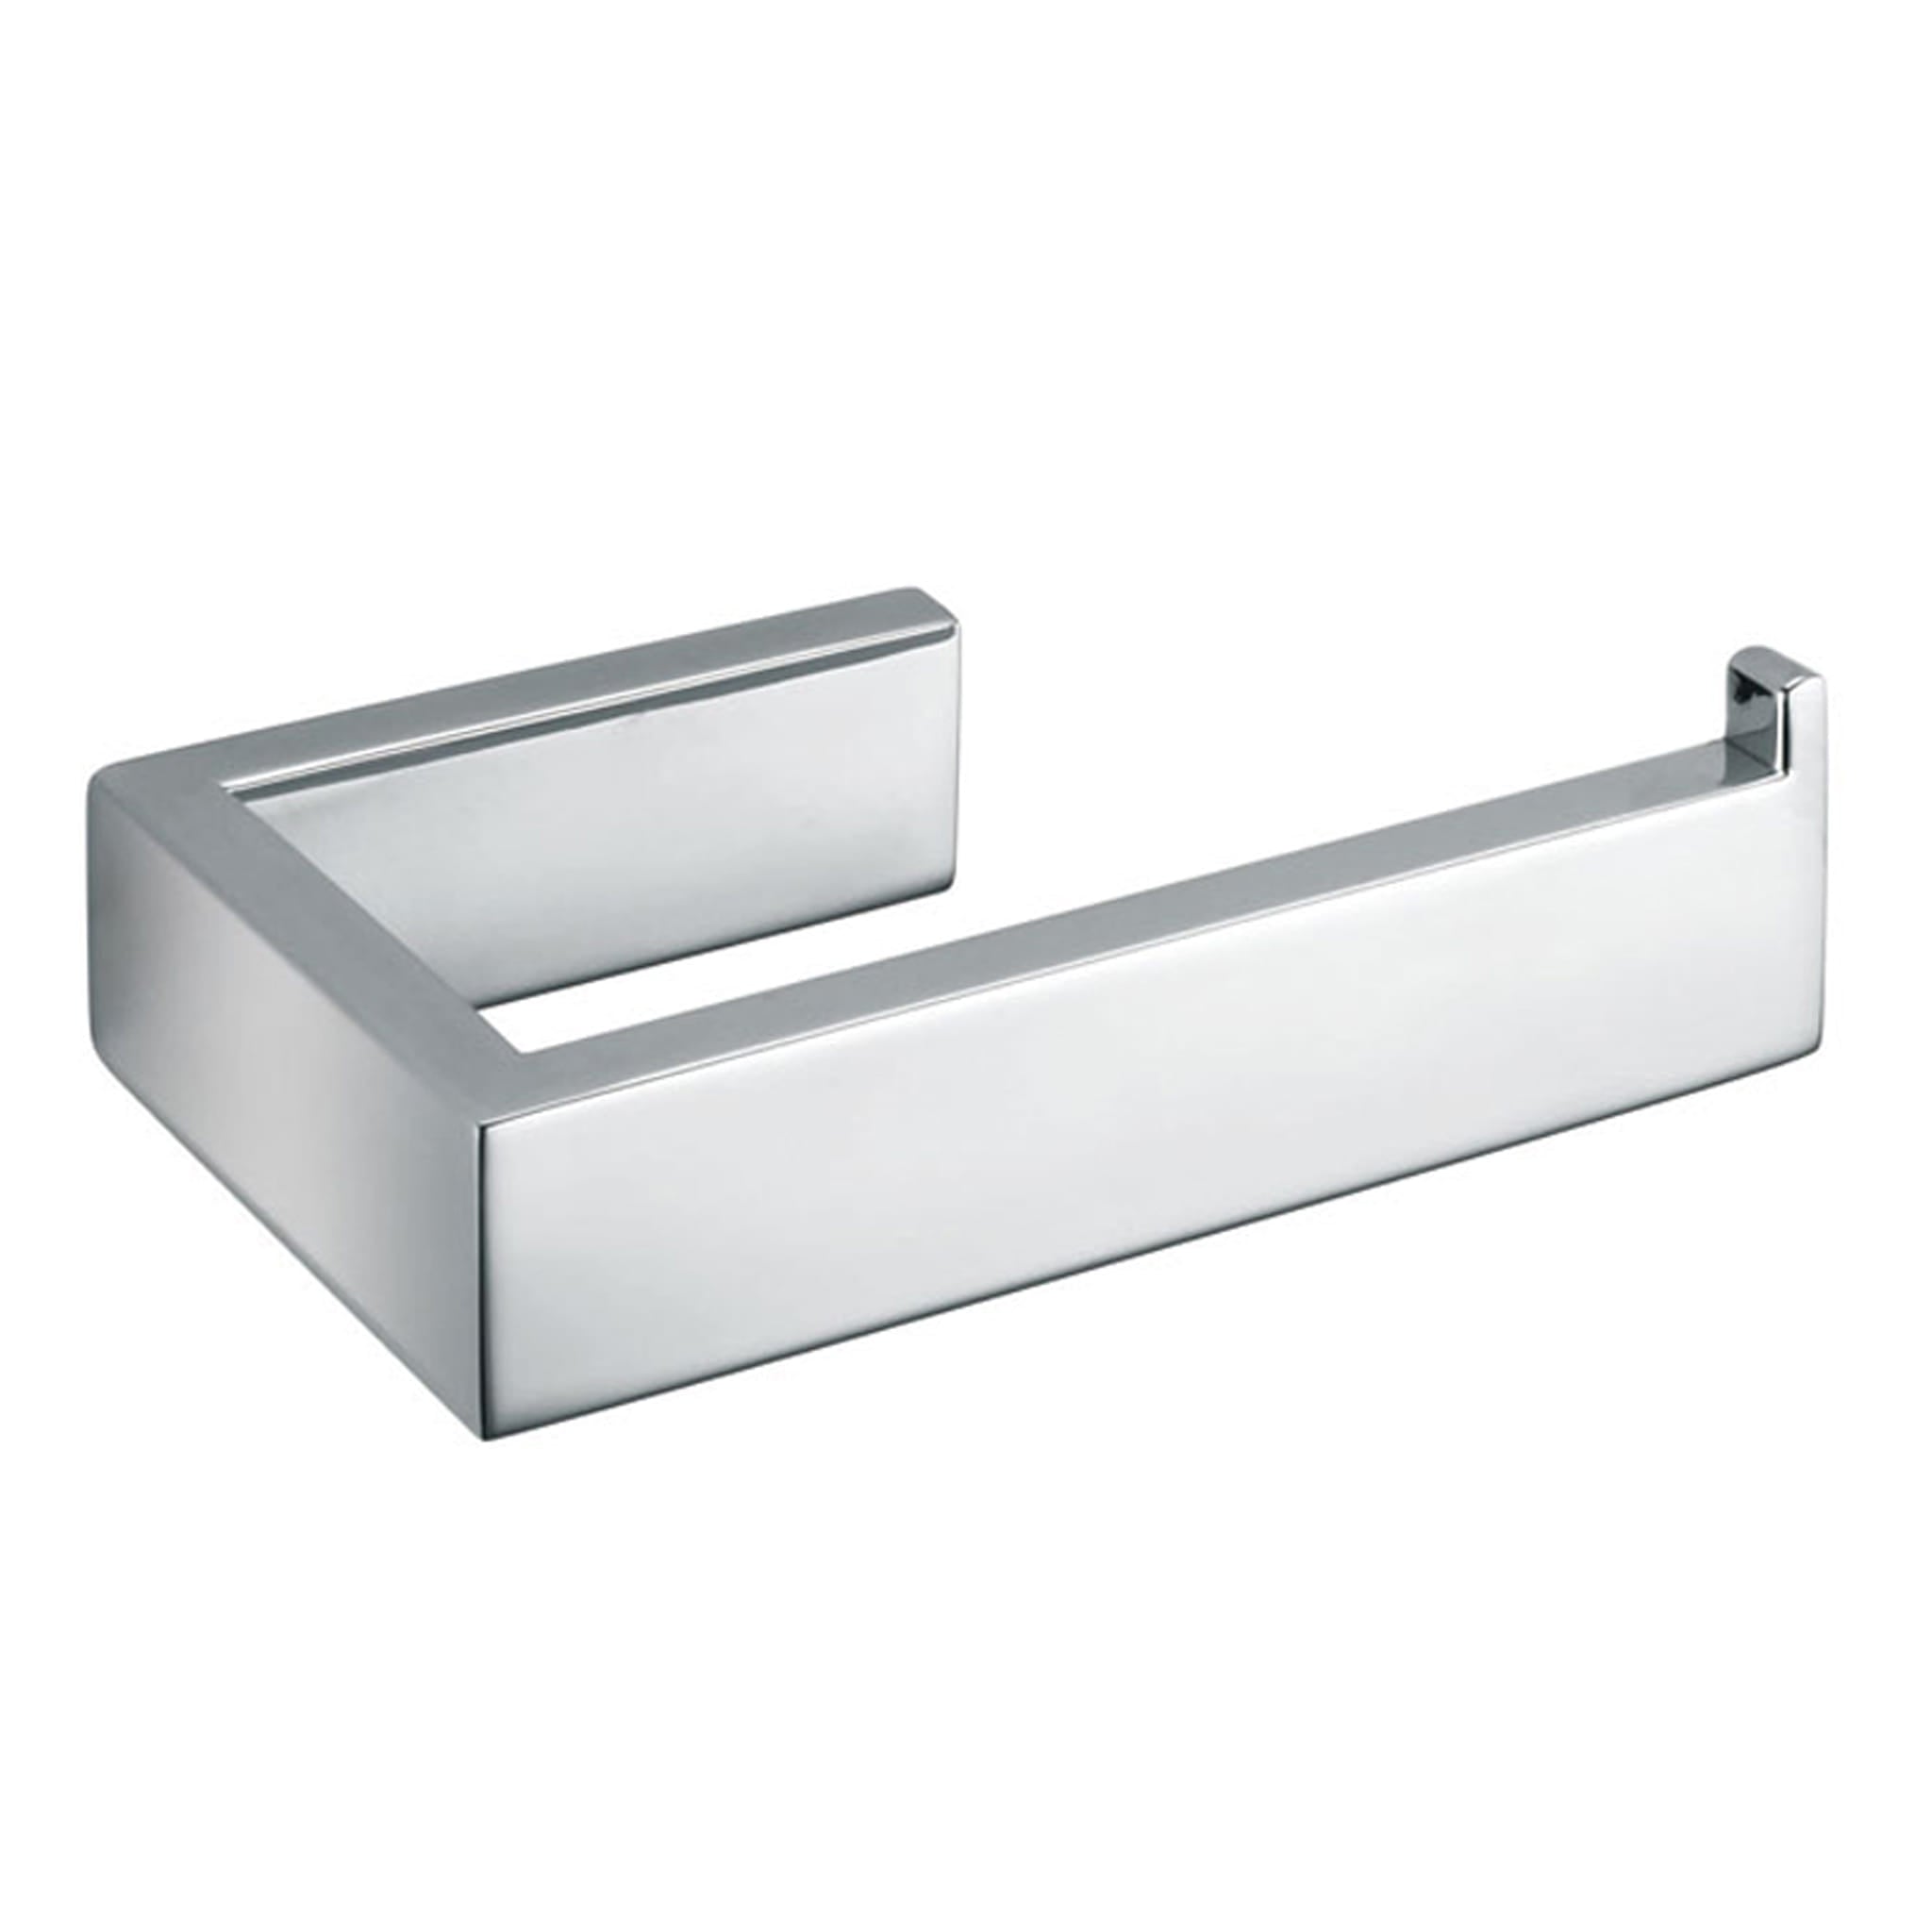 Aquamoon A34 Toilet Paper Holder 6" Wall Mounted Accessory Chrome Finish